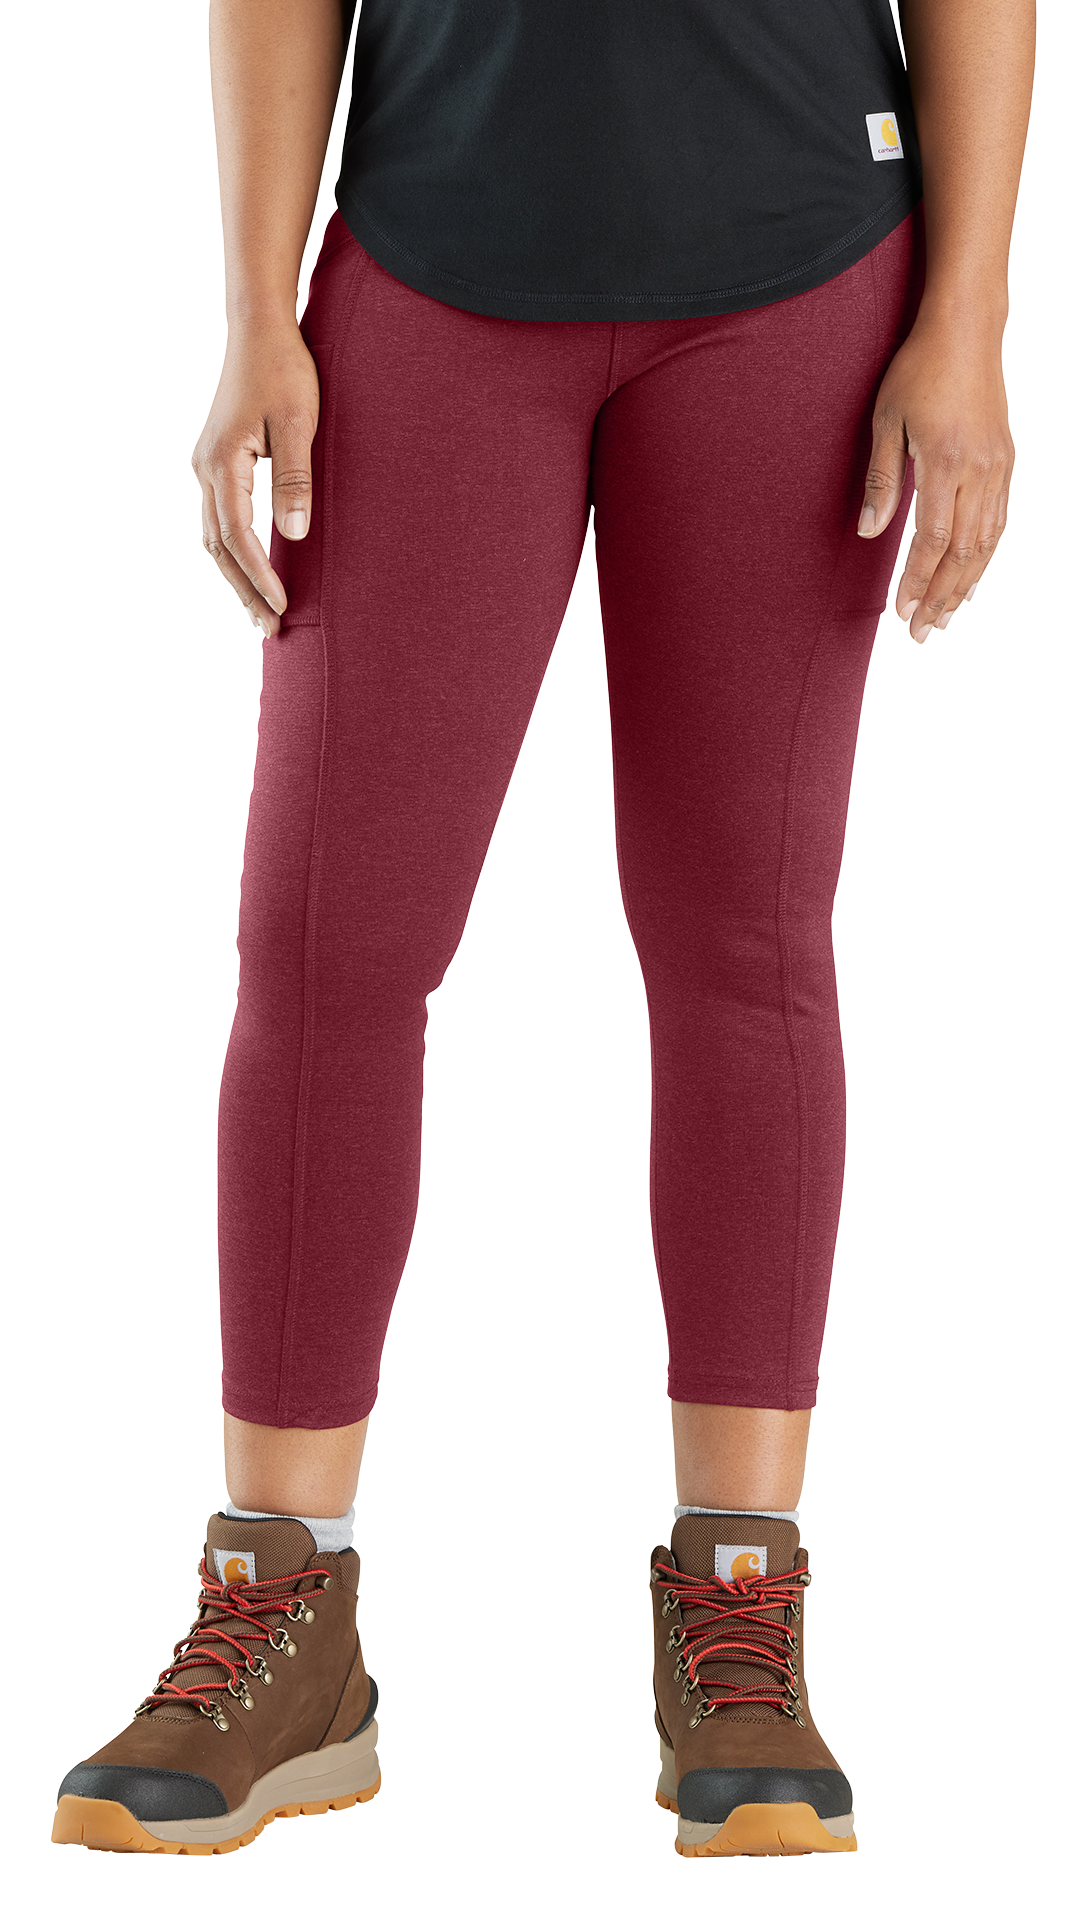 Carhartt Force Fitted Lightweight Ankle-Length Leggings for Ladies